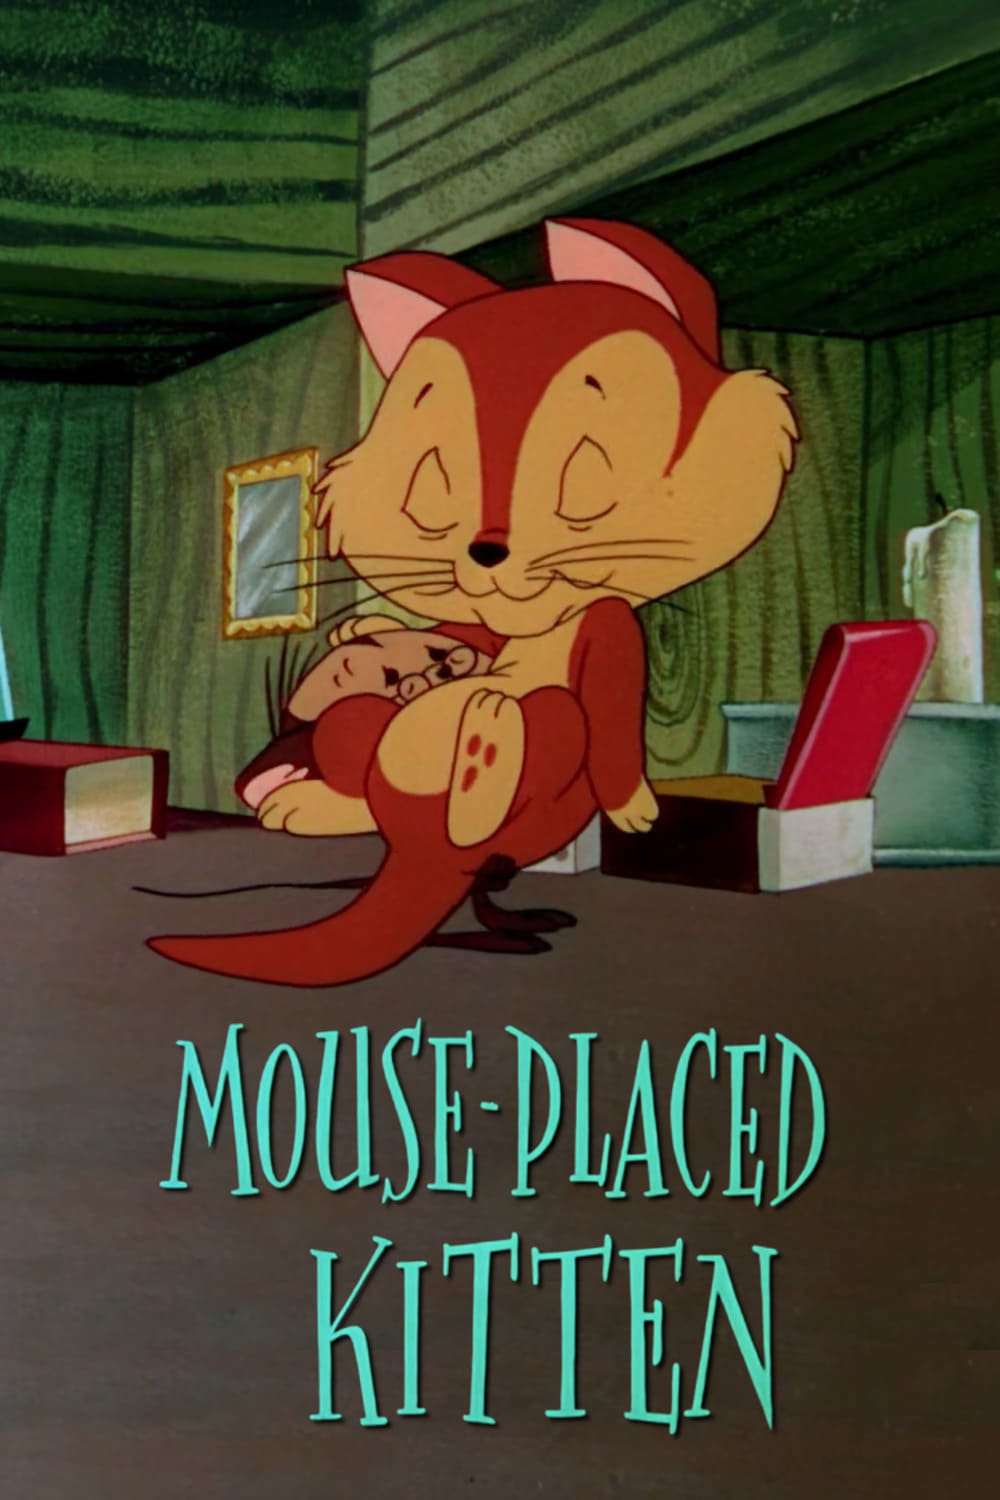 Mouse-Placed Kitten (1959)